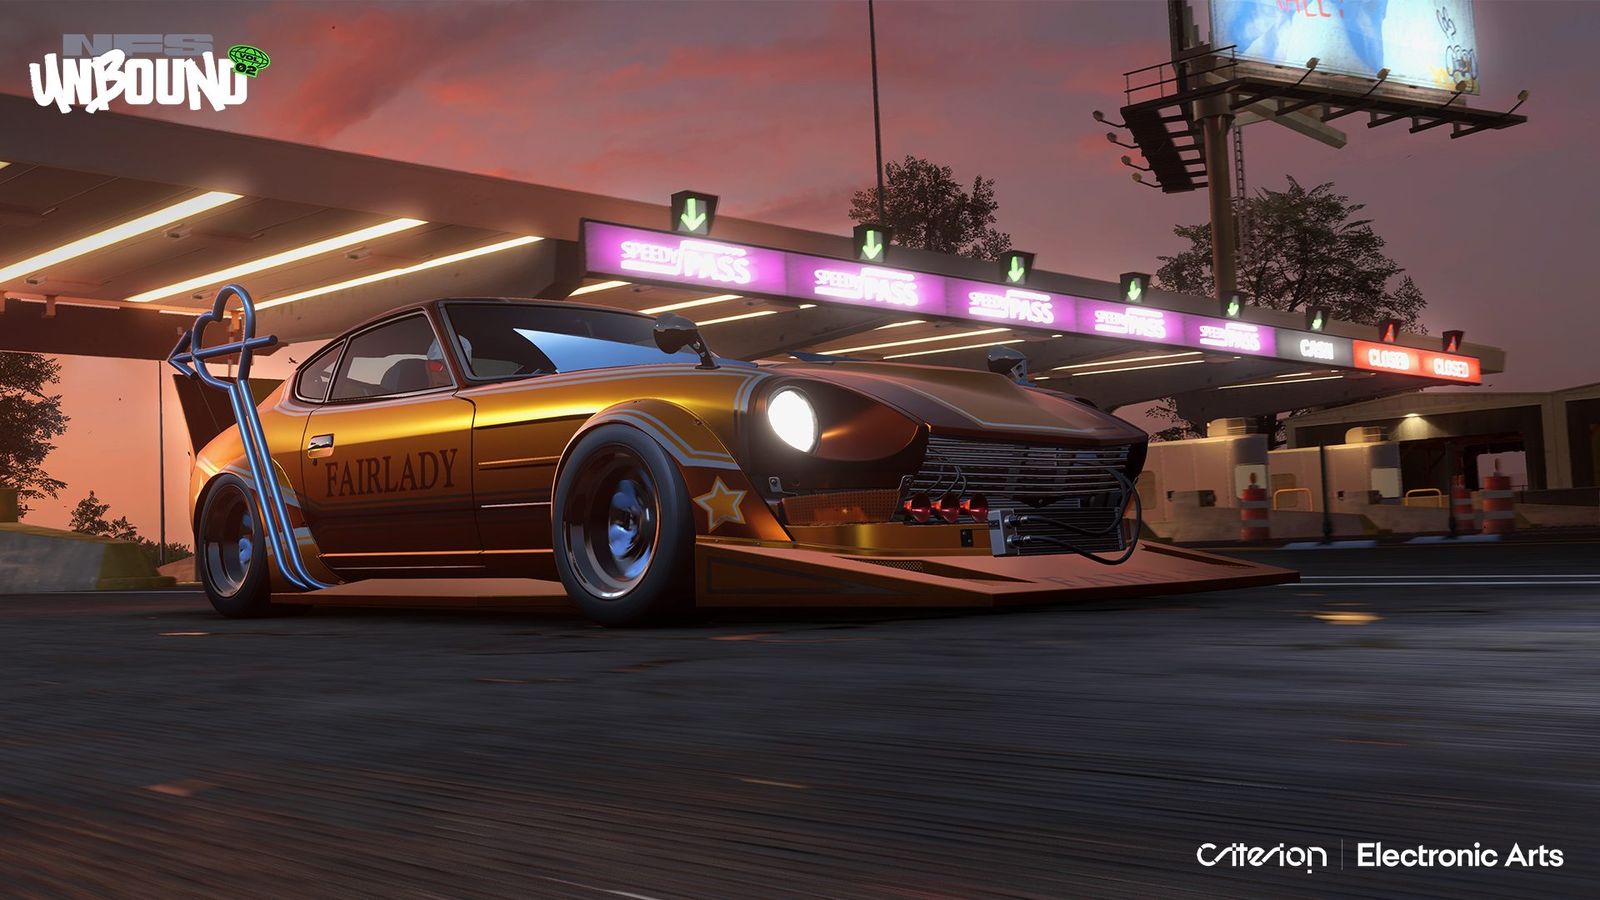 Need for Speed Unbound Vol 2 update Nissan Fairlady ZG 1971